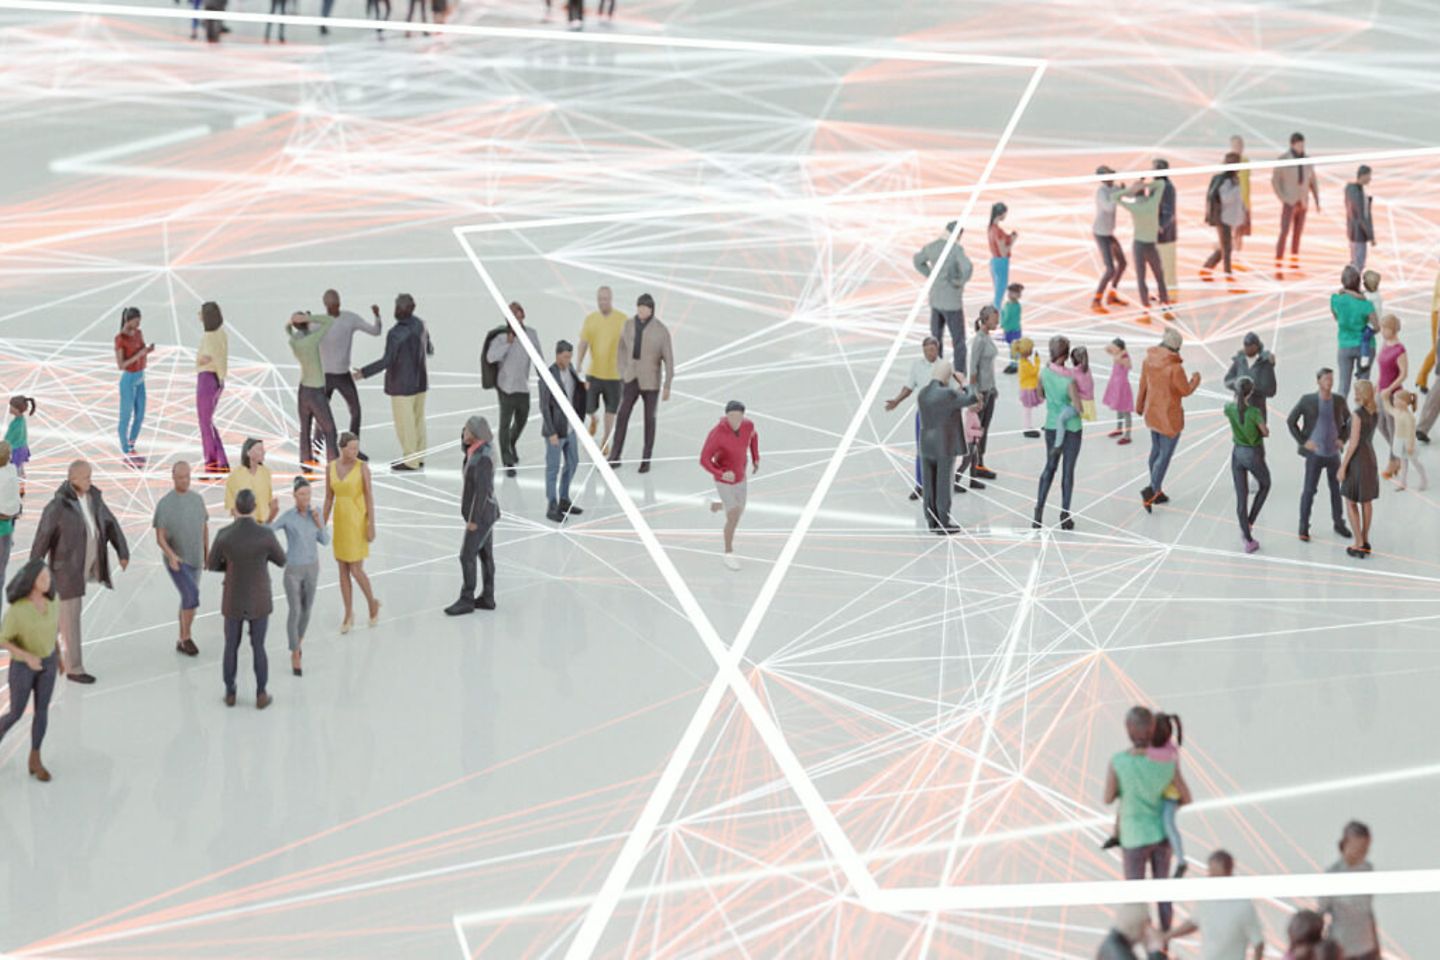 Many figures of people on a digital surface